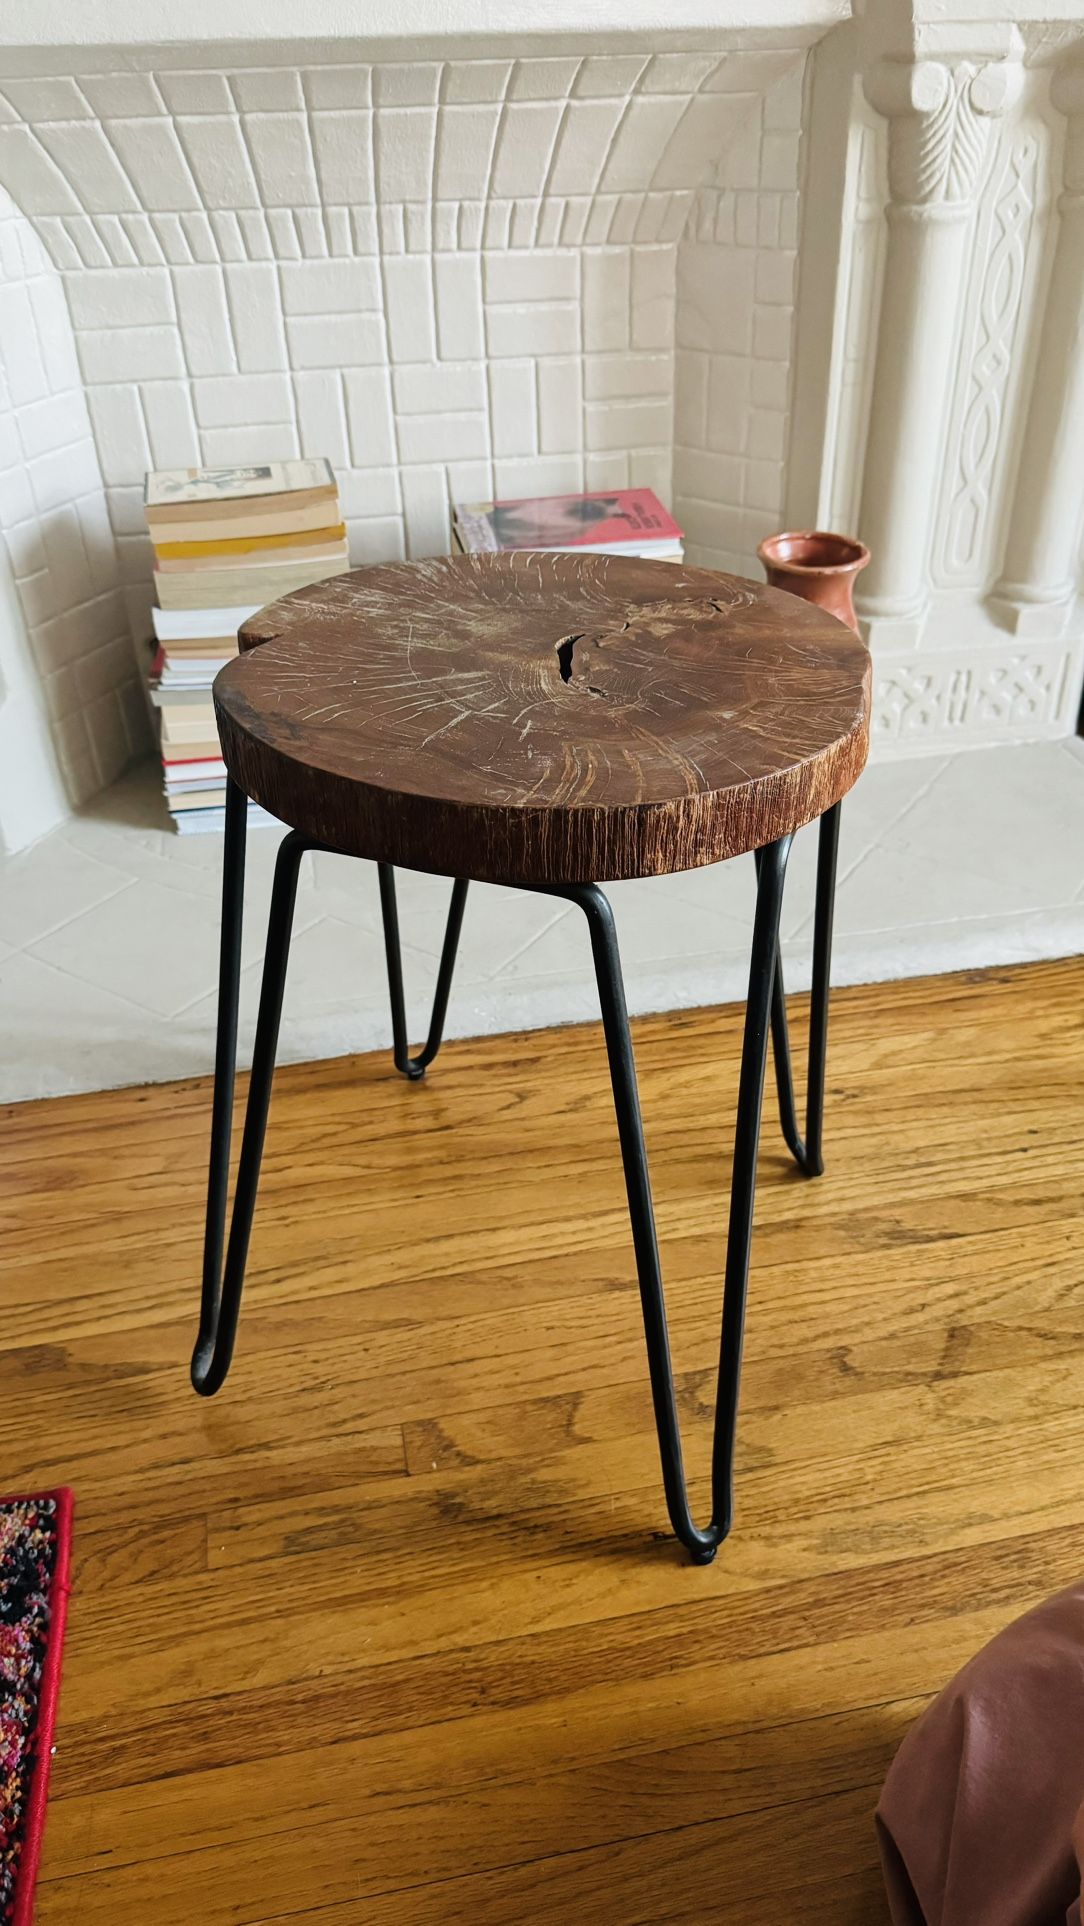 Crate & Barrel Wood Stool / Small Table